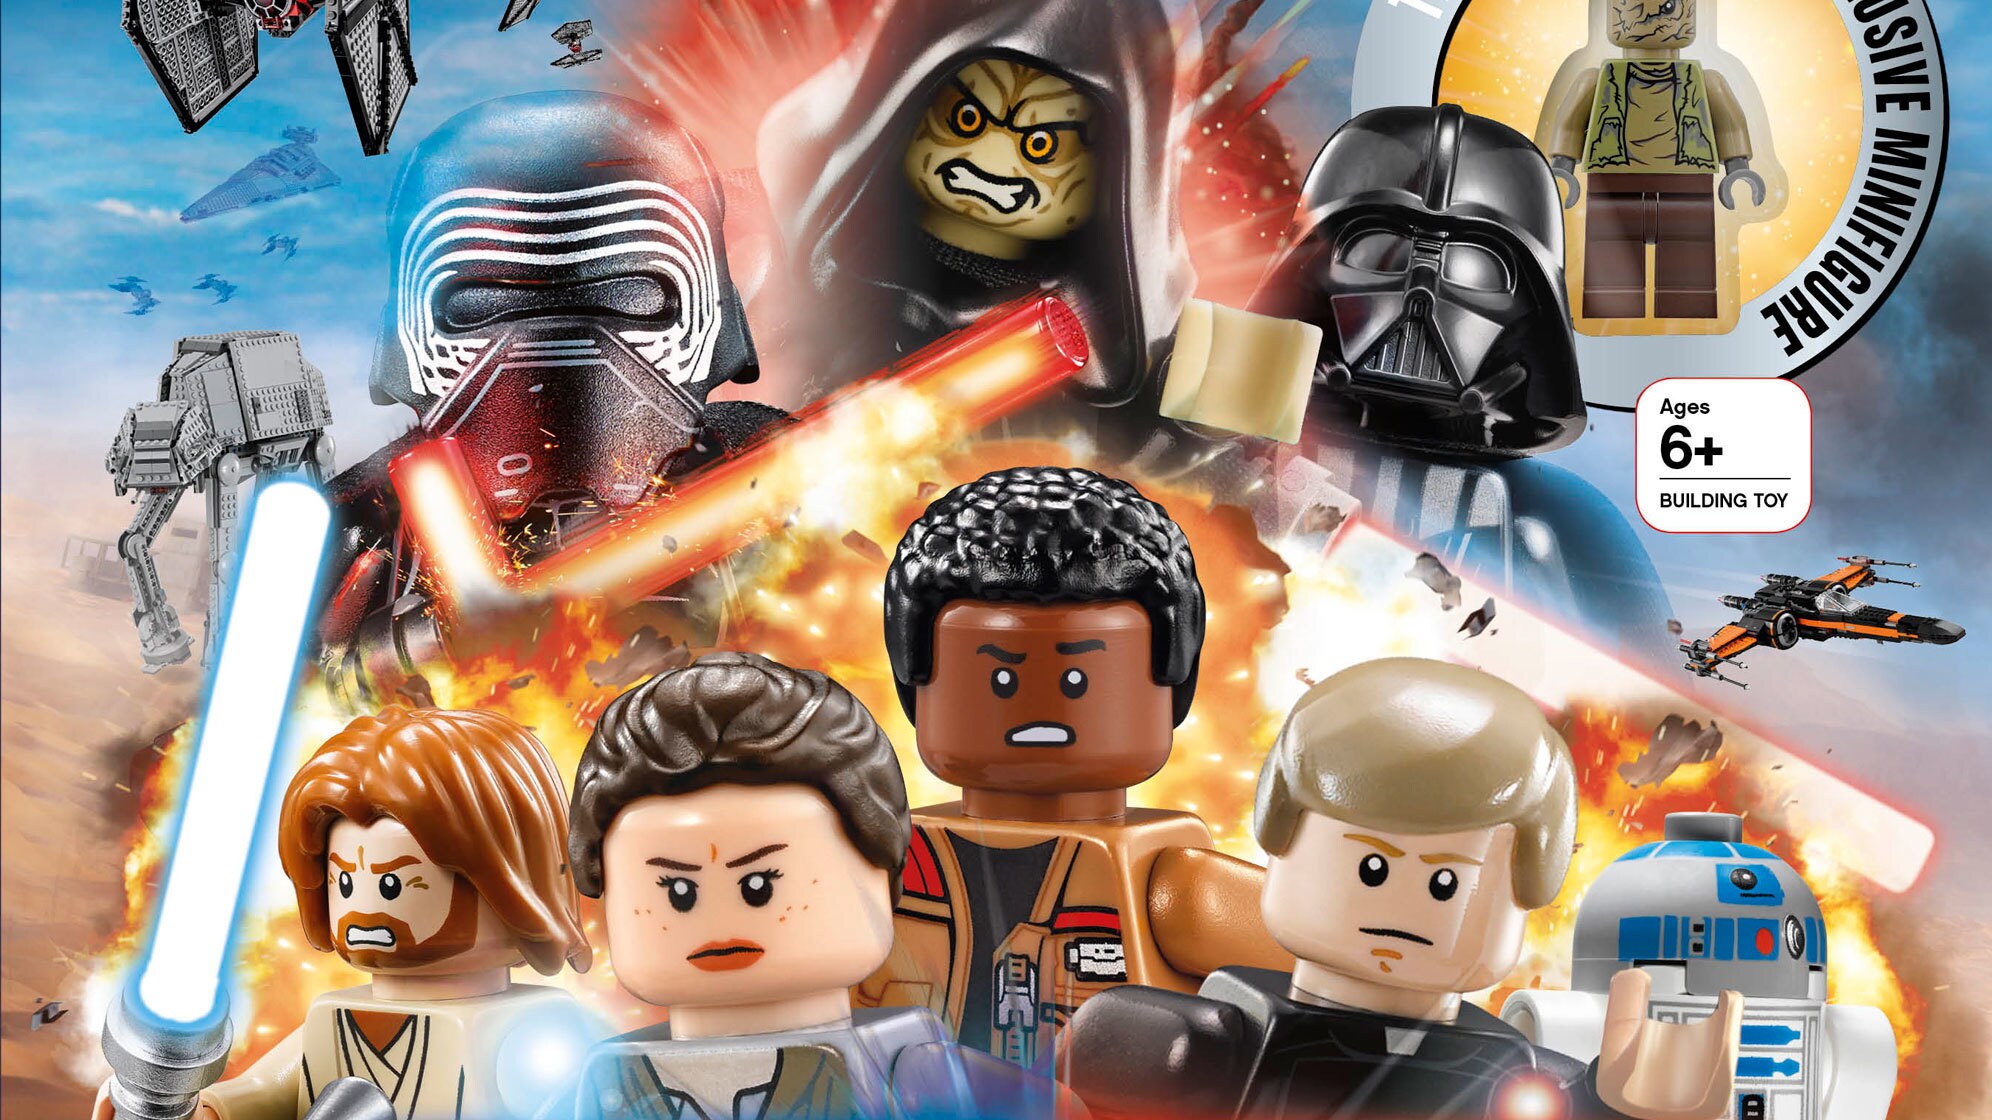 LEGO Star Wars: Chronicles of the Force